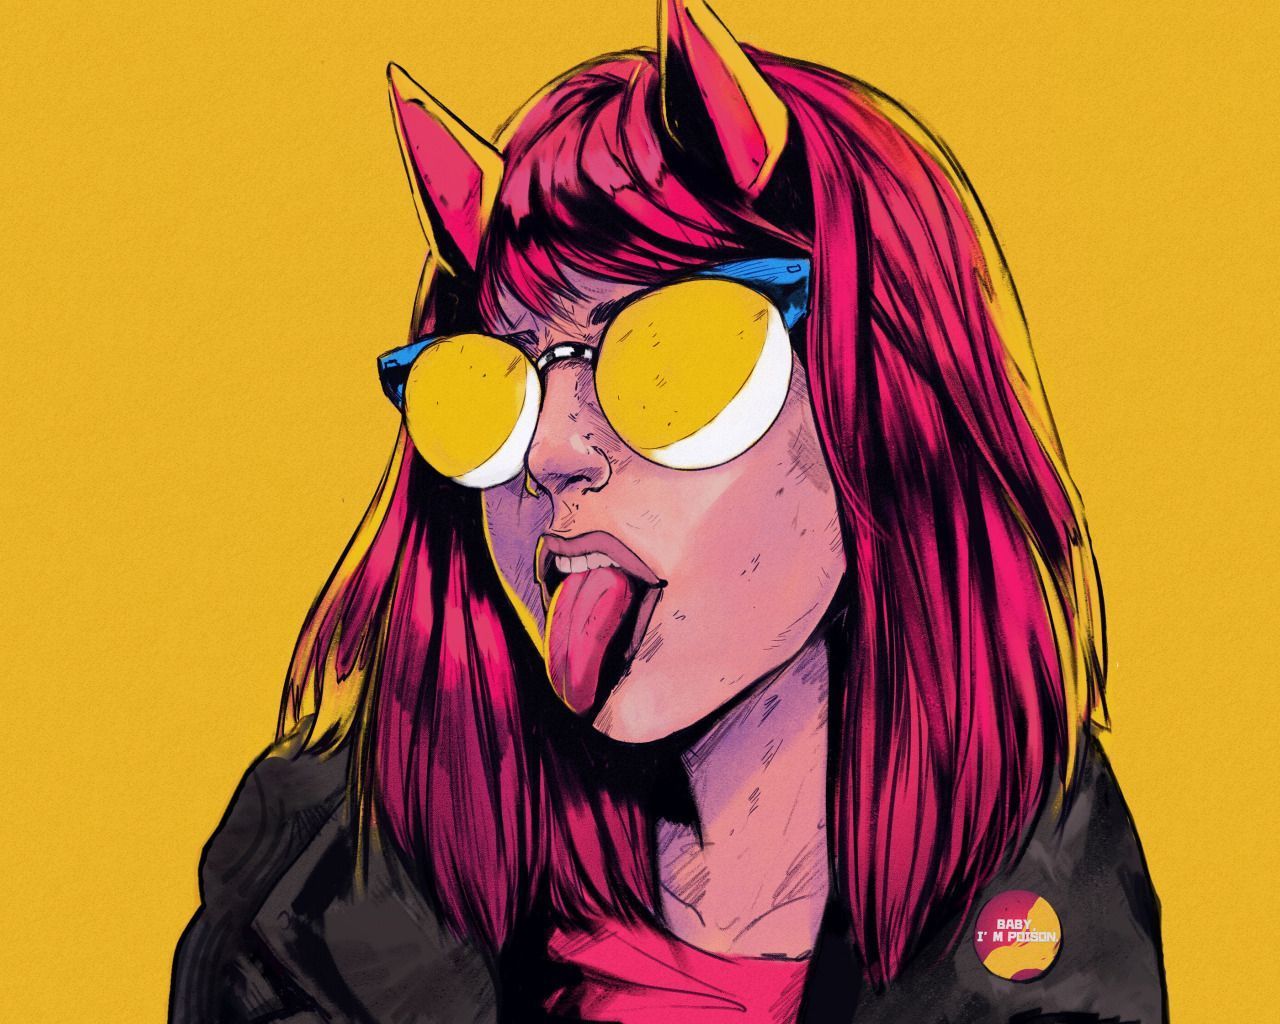 A woman with pink hair and yellow sunglasses, licking her tongue out. - 1280x1024, illustration